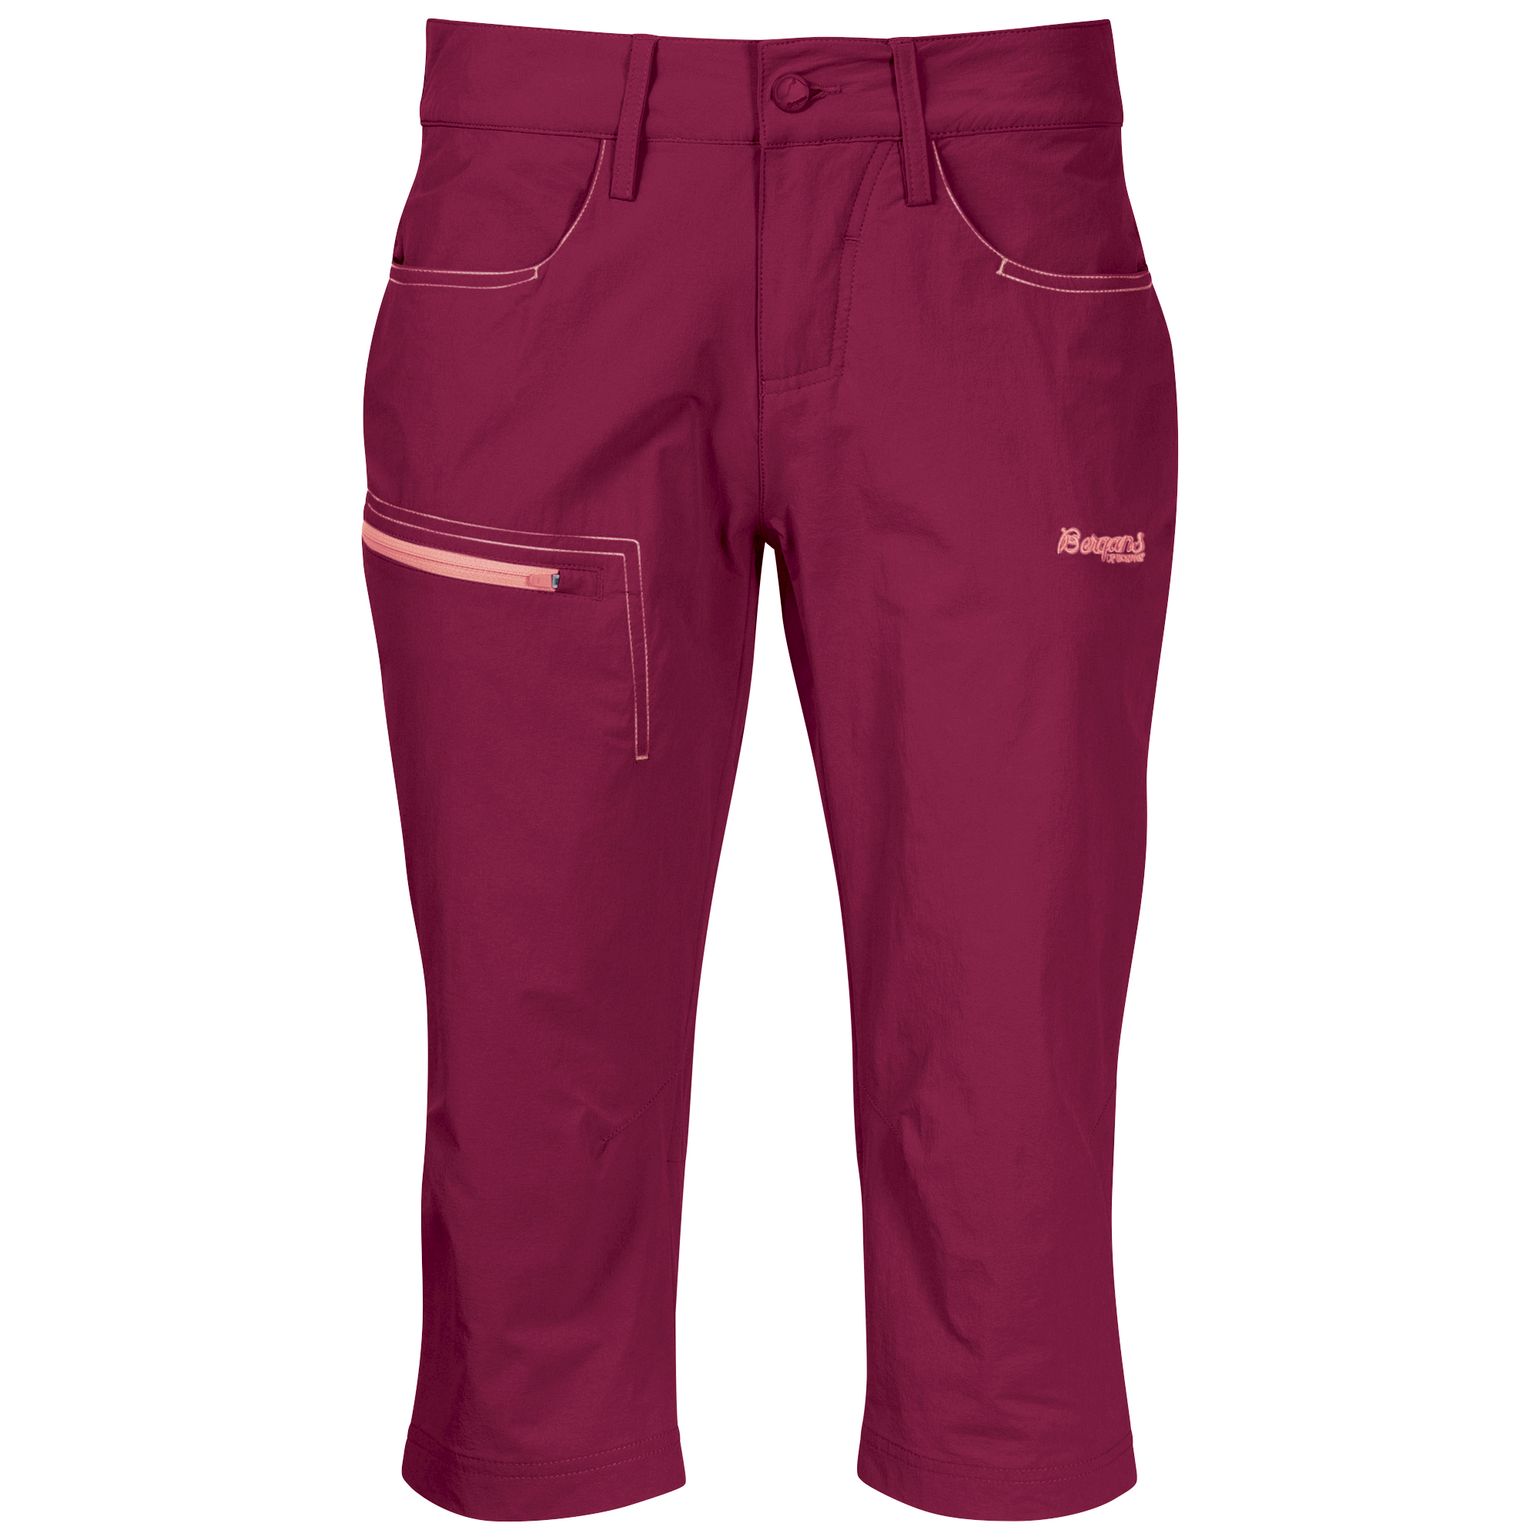 Women's Moa Pirate Pant Beet Red/Peach Pink